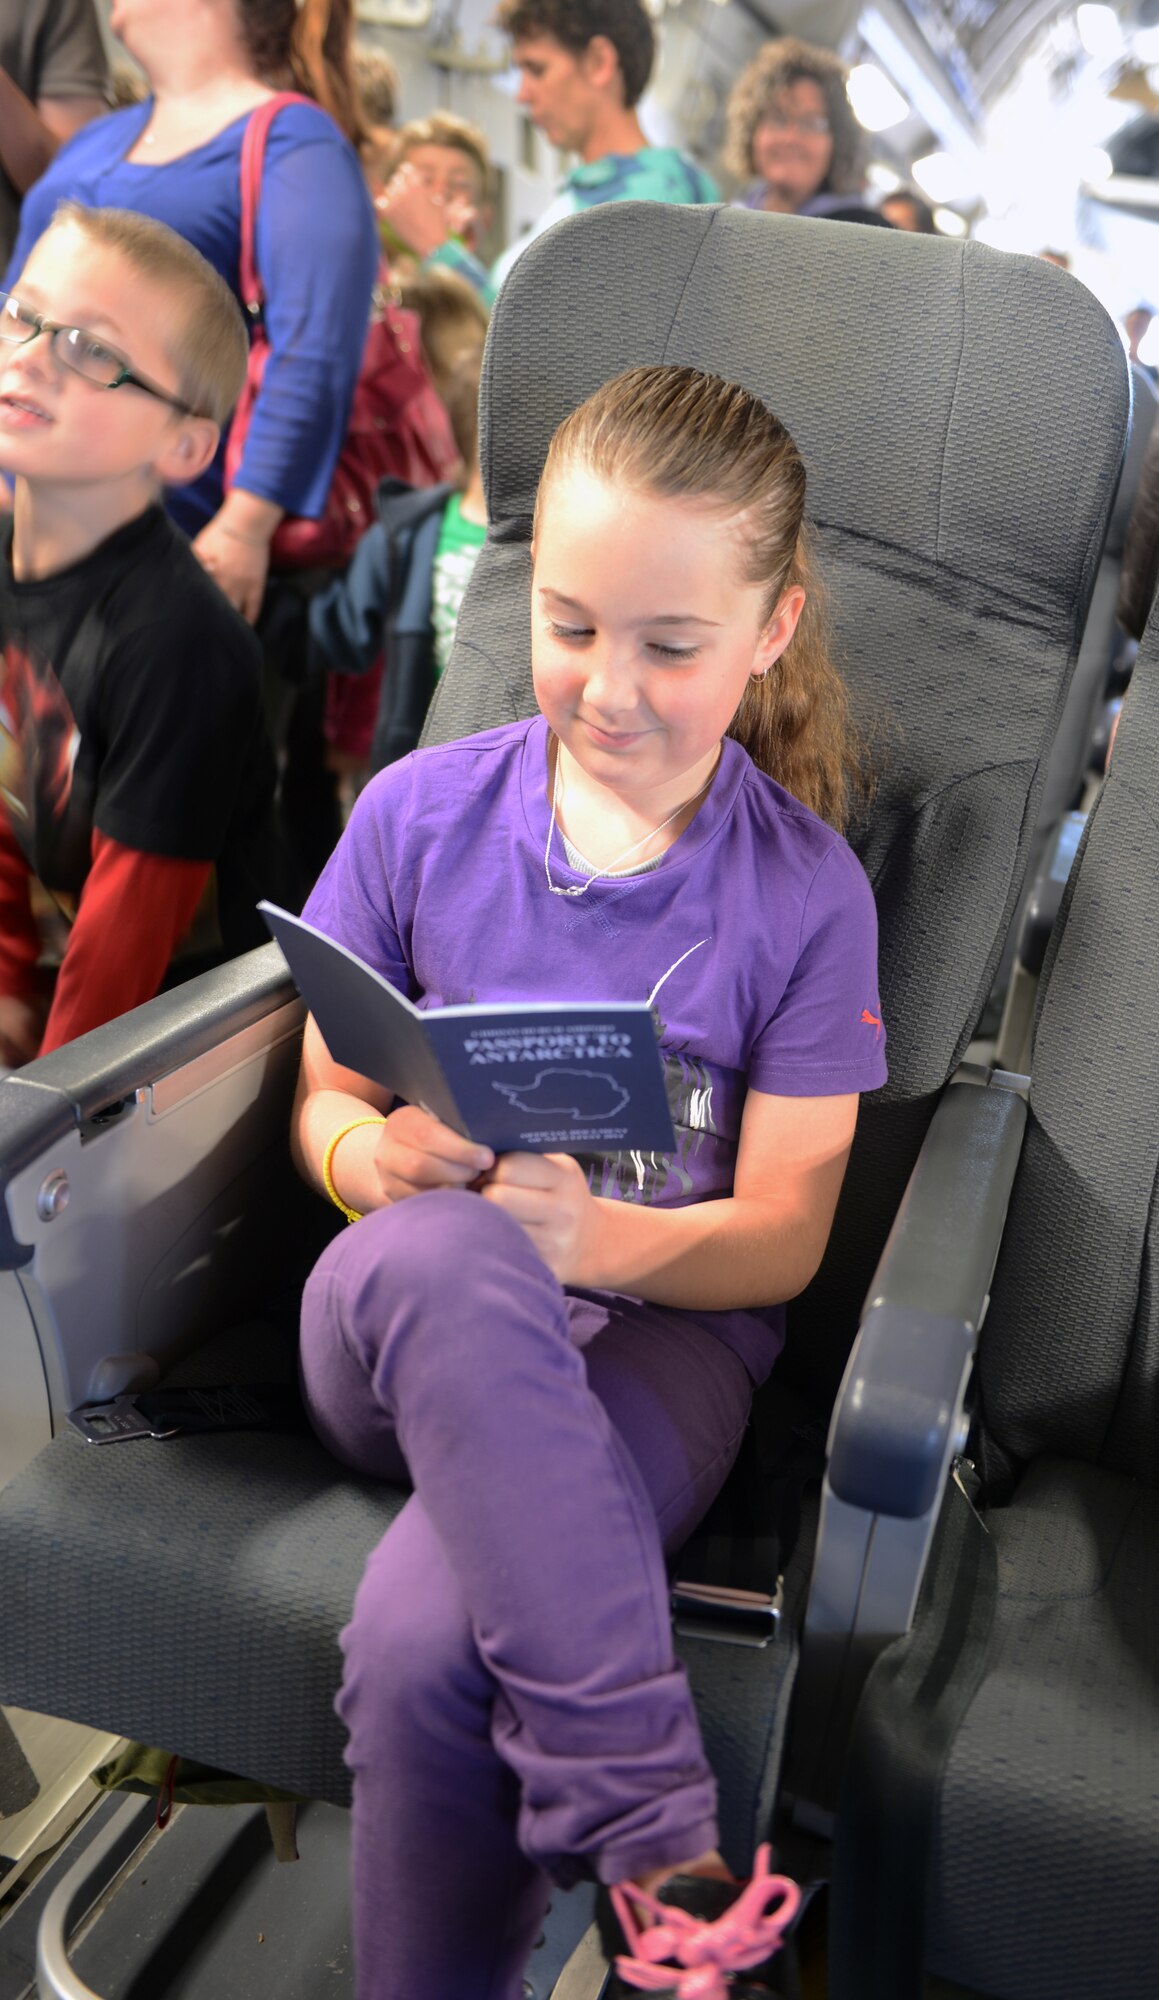 A young New Zealand girl looks through her IceFest 2014 passport while waiting for an opportunity to visit the flight deck of the C-17 Globemaster III, Oct. 5th, 2014 as part of the U.S. Antarctic Program Day for IceFest 2014 at Christchurch, New Zealand. More than 7,000 community members visited the C-17 throughout the day. (U.S. Air Force photo/Master Sgt. Todd Wivell)